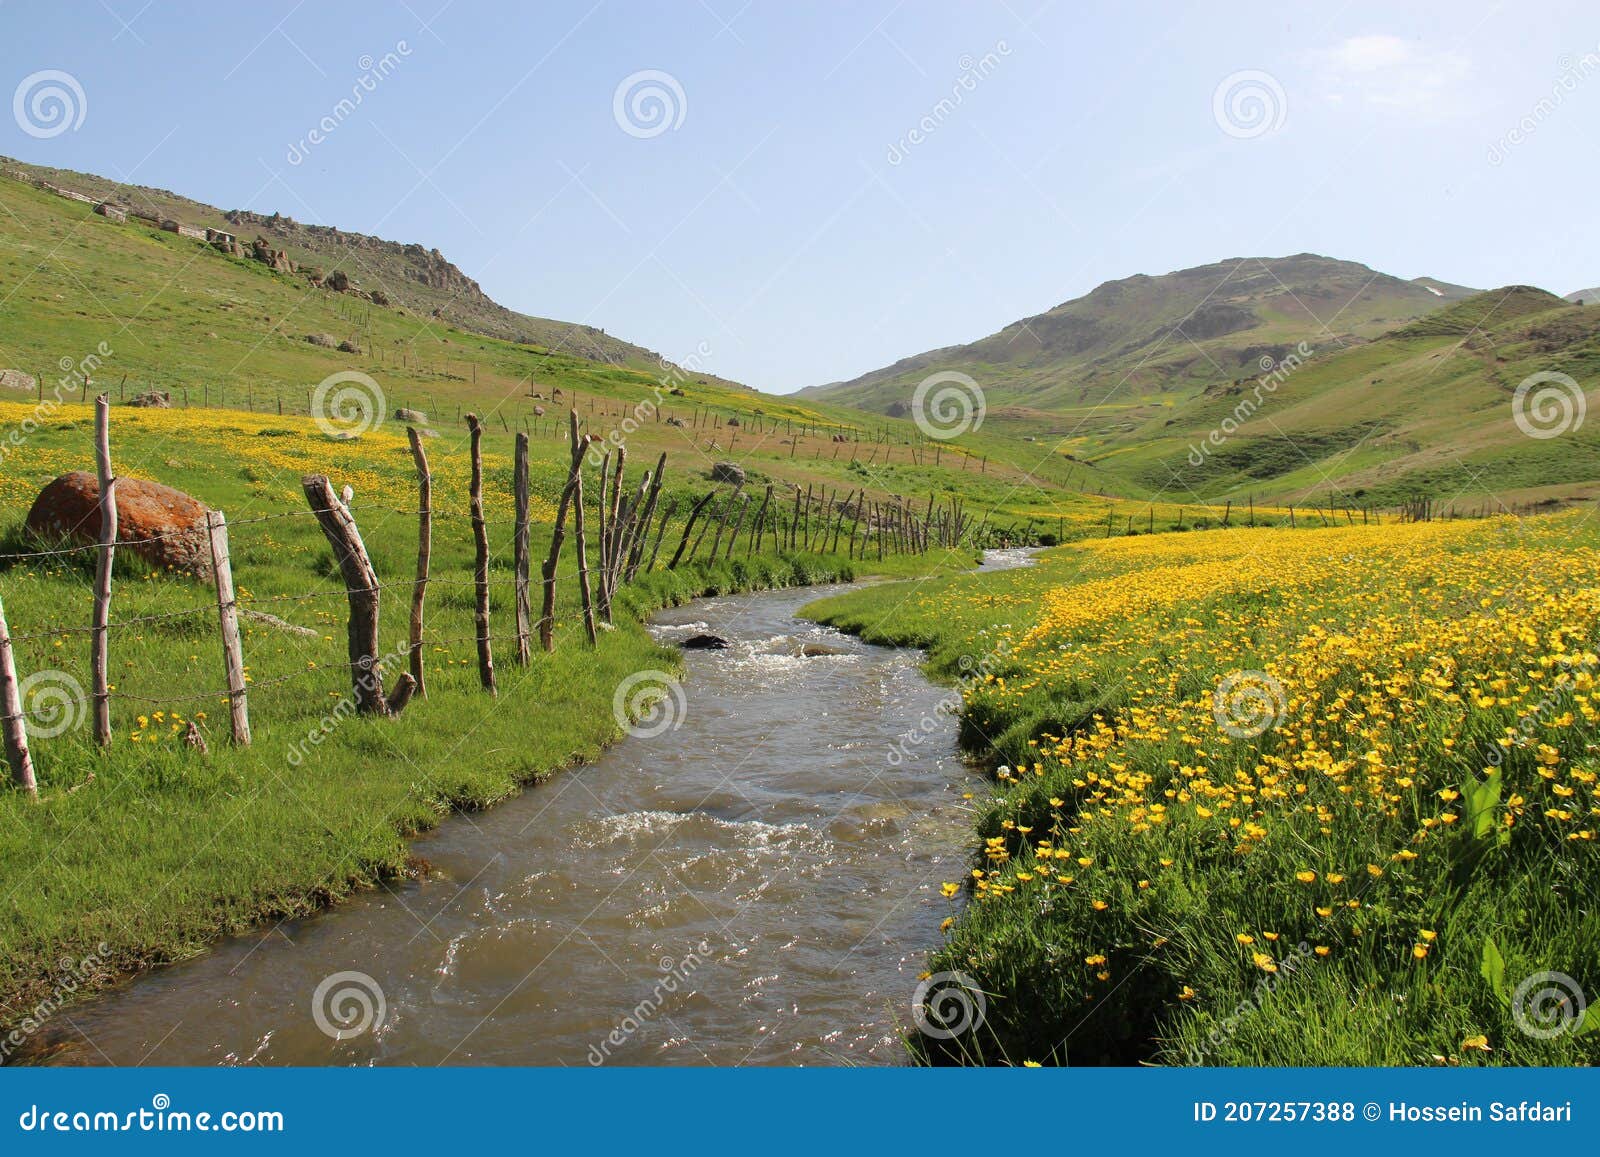 a beautiful river flowing in the plain